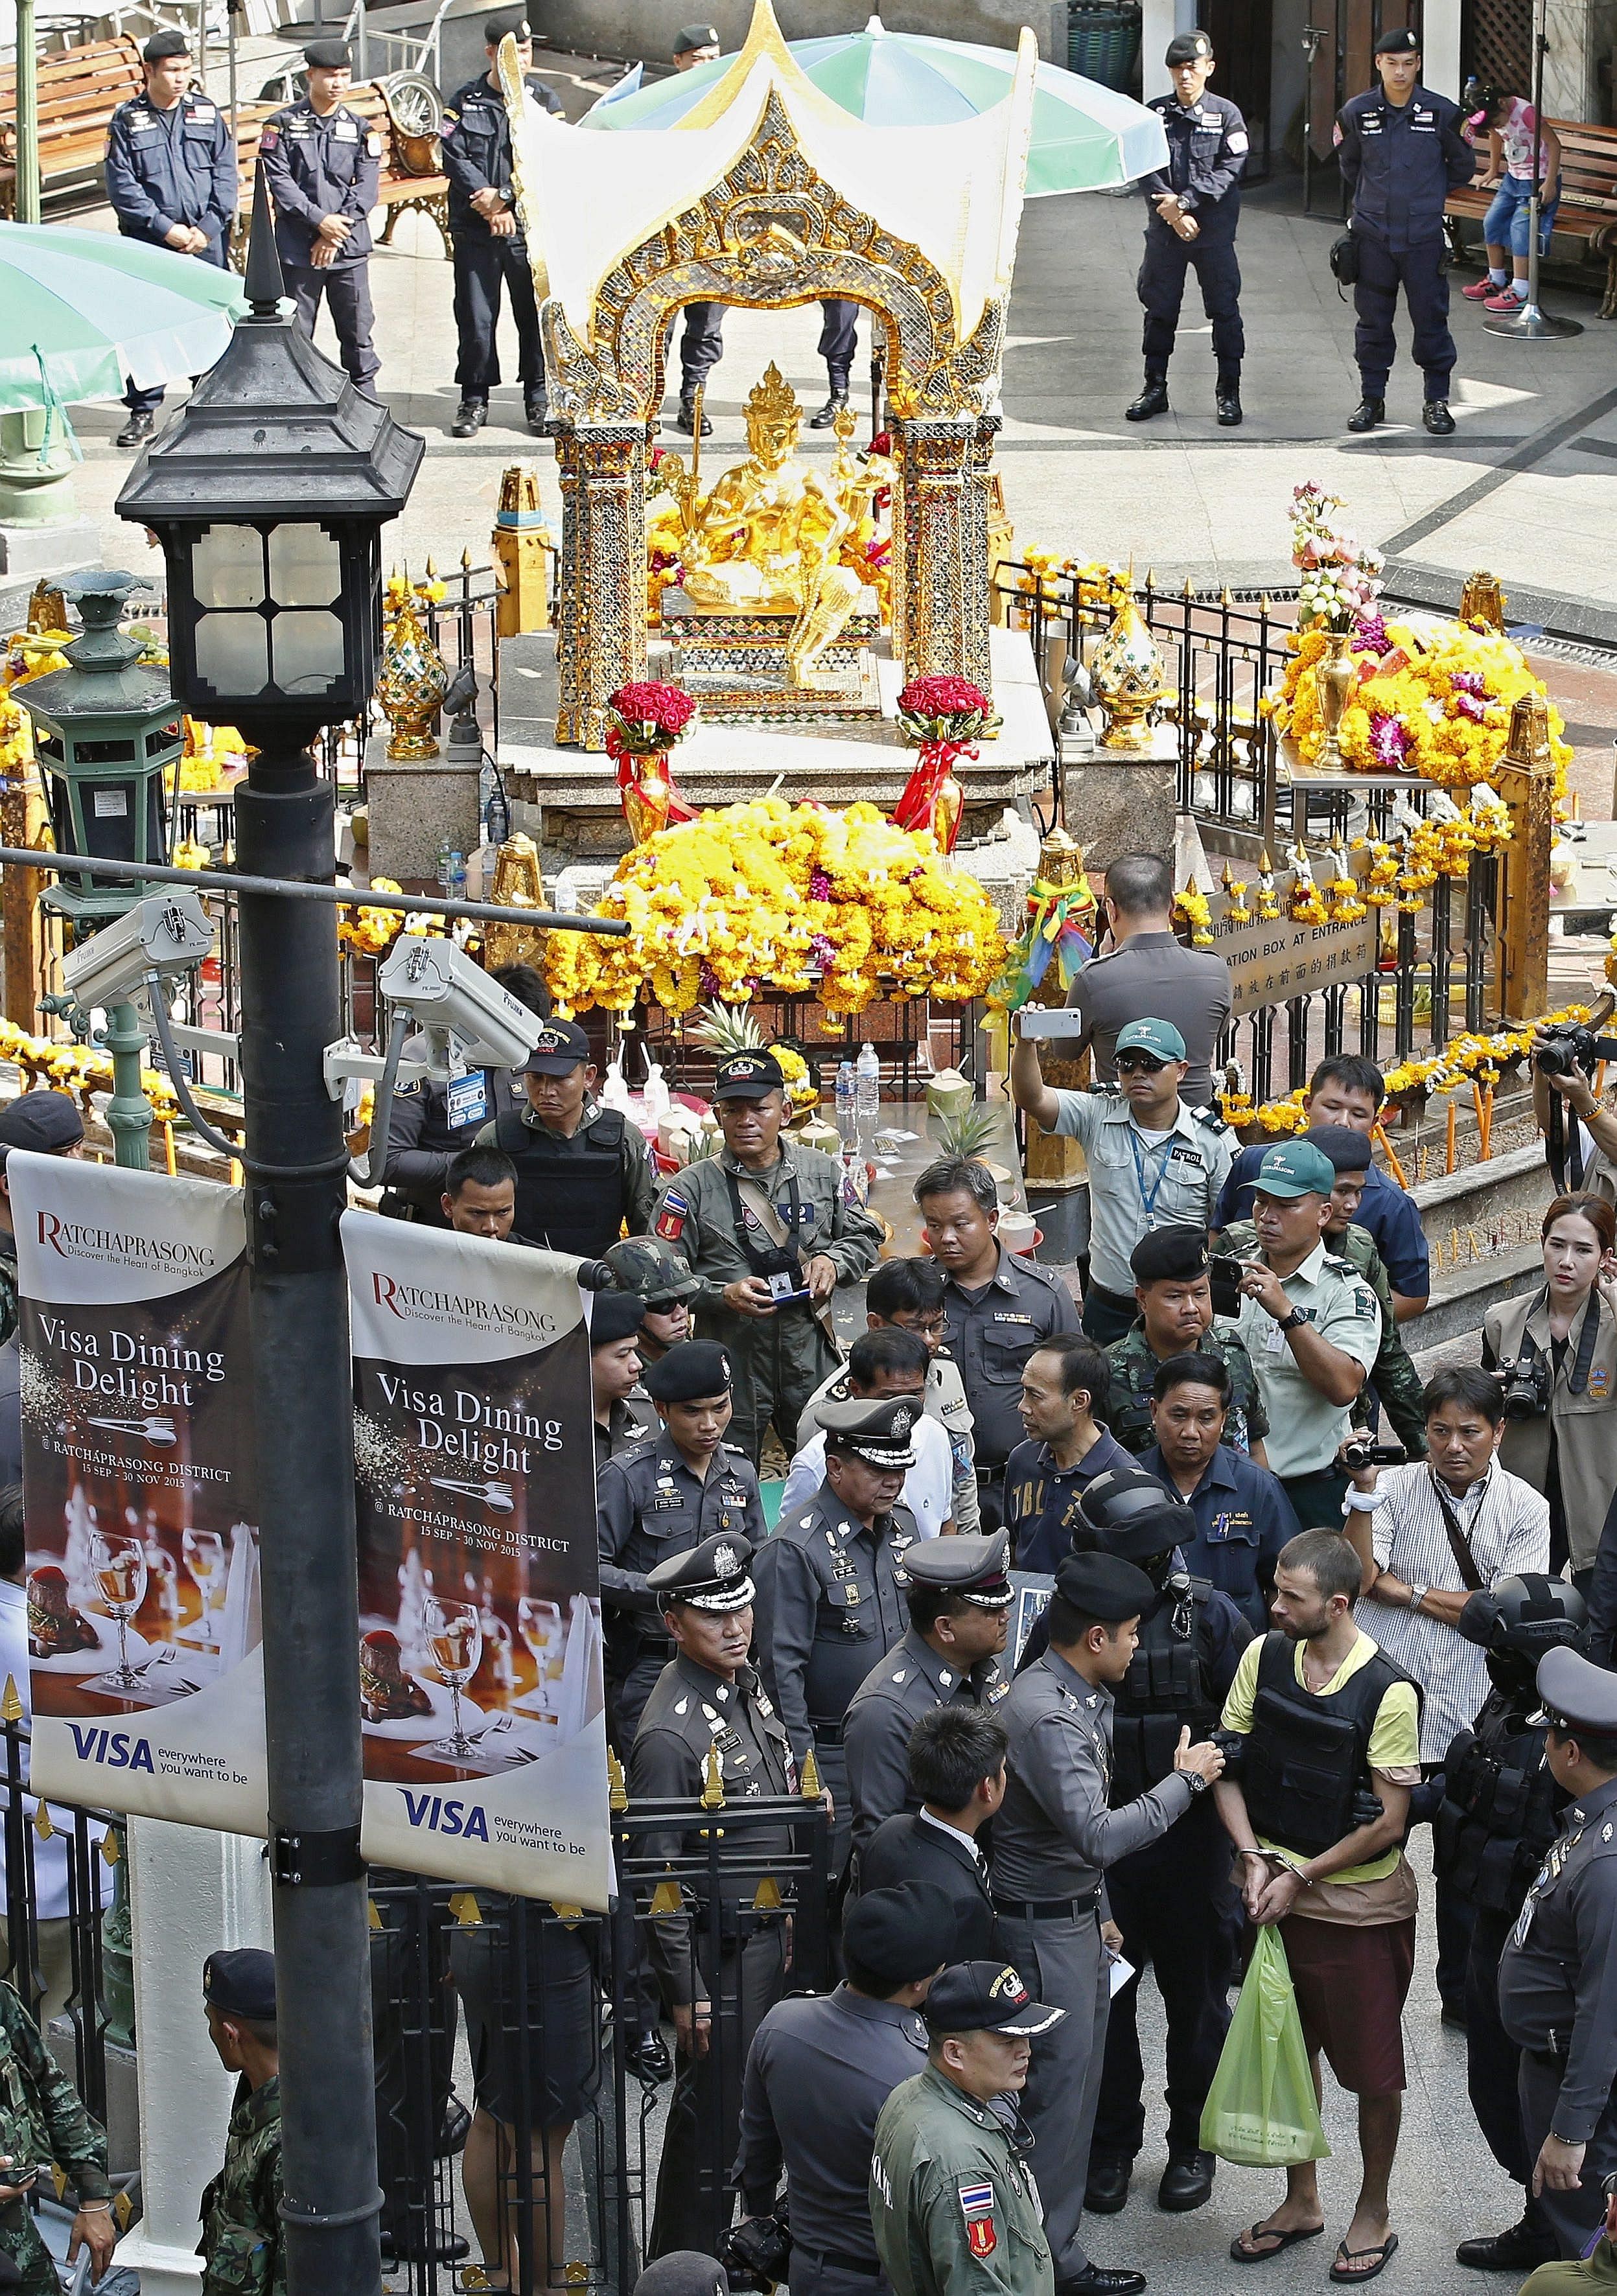 The Erawan bomb main suspect (in yellow vest) with police during a crime re-enactment last month at the blast site. If attacks do occur, countries need to have mechanisms to react quickly to ensure perpetrators are brought to justice.